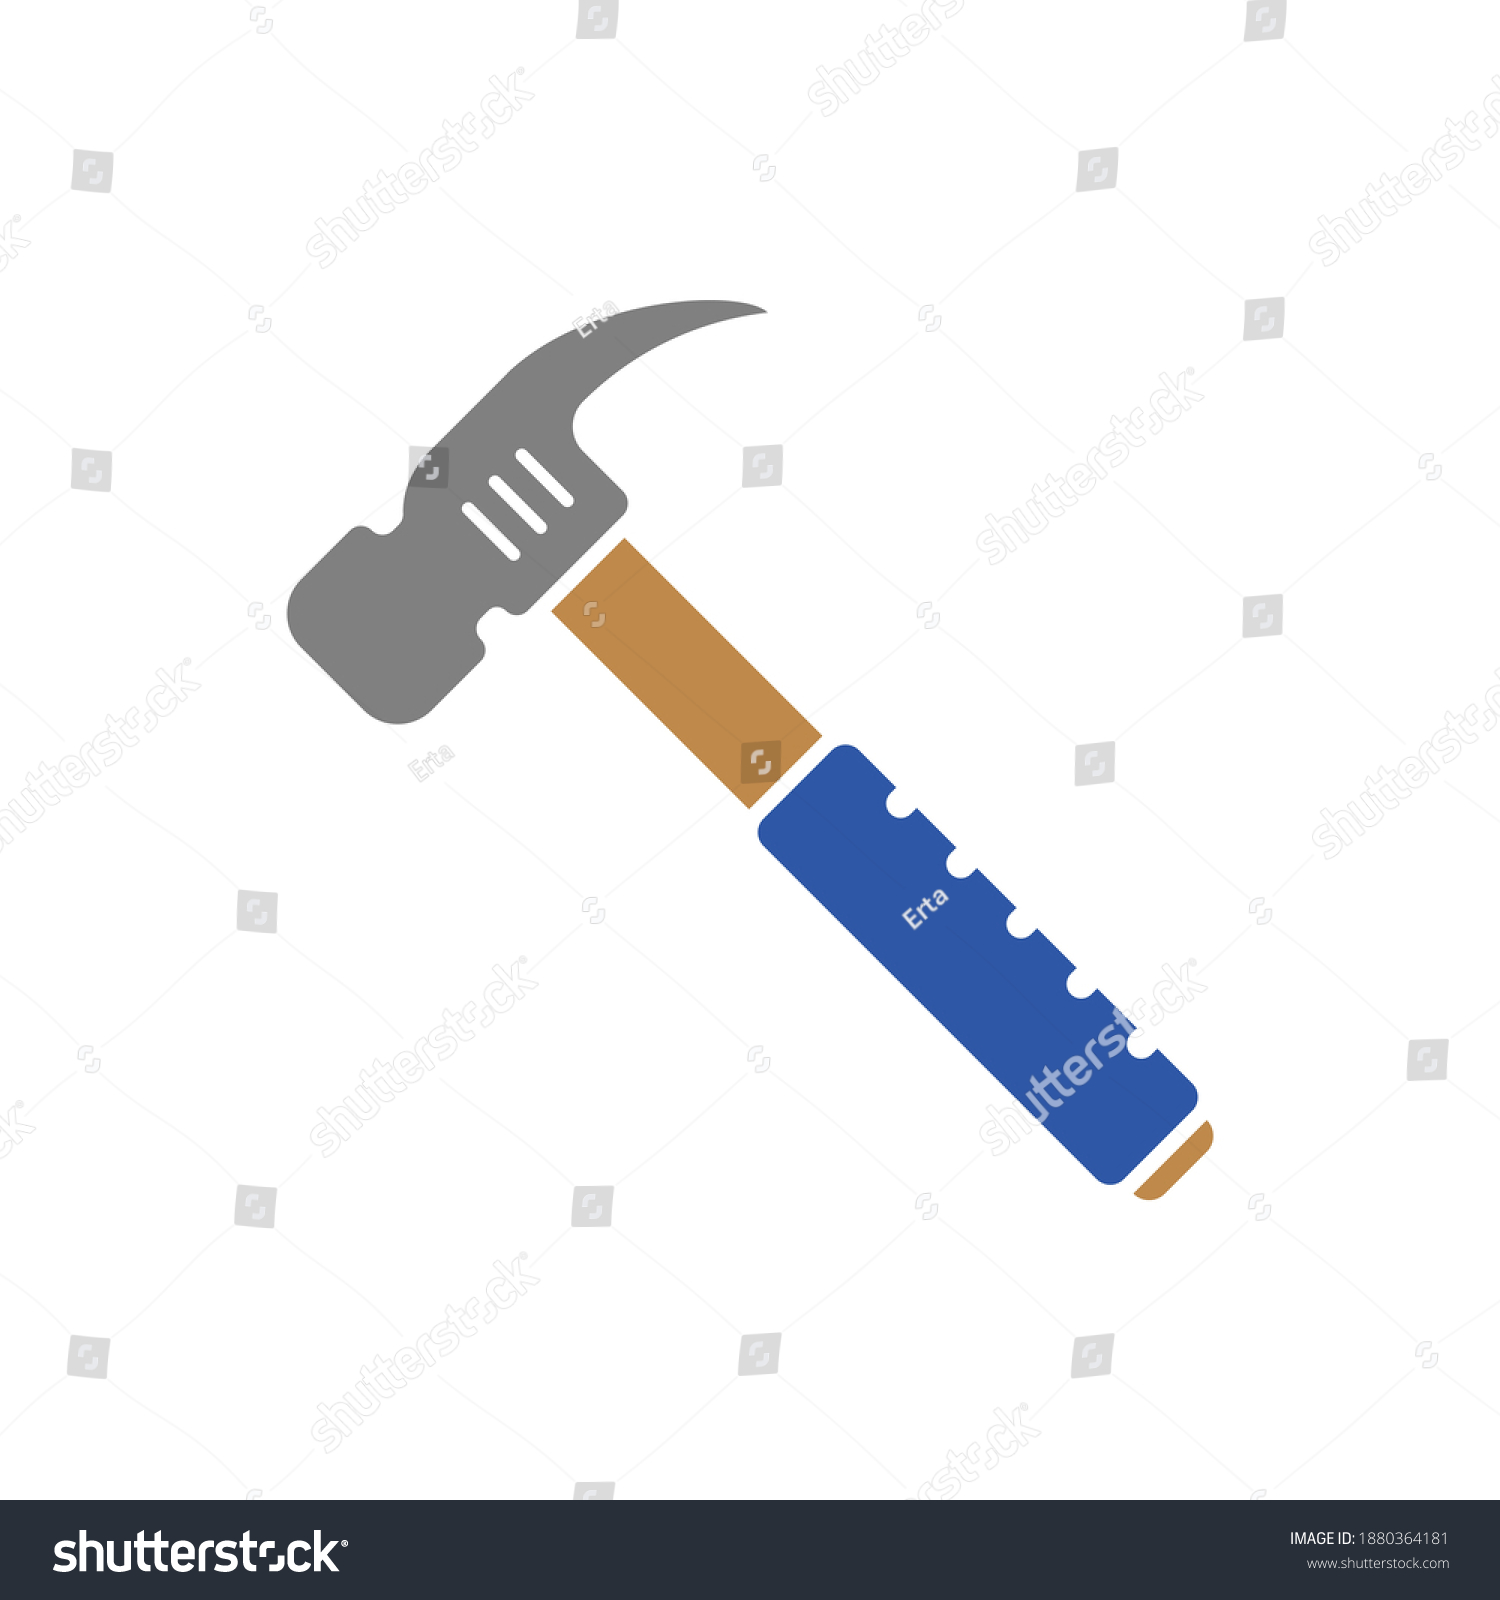 SVG of Claw hammer icon flat style isolated on white background. Vector illustration svg